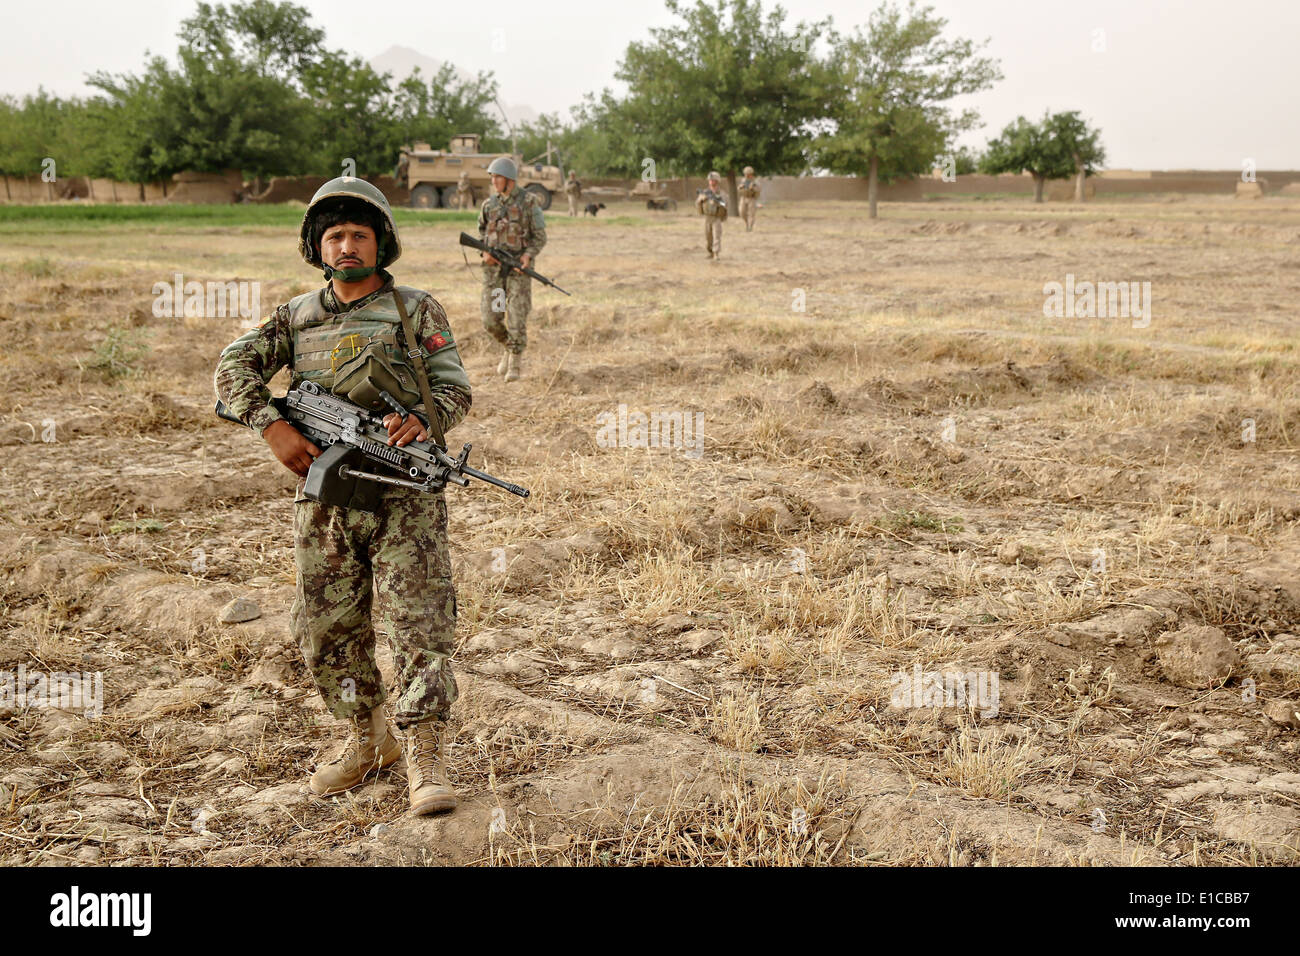 Afghan National Army soldiers conduct a joint patrol with US Marines during a counter-insurgency mission May 16, 2014 in Larr Village, Helmand province, Afghanistan. Stock Photo